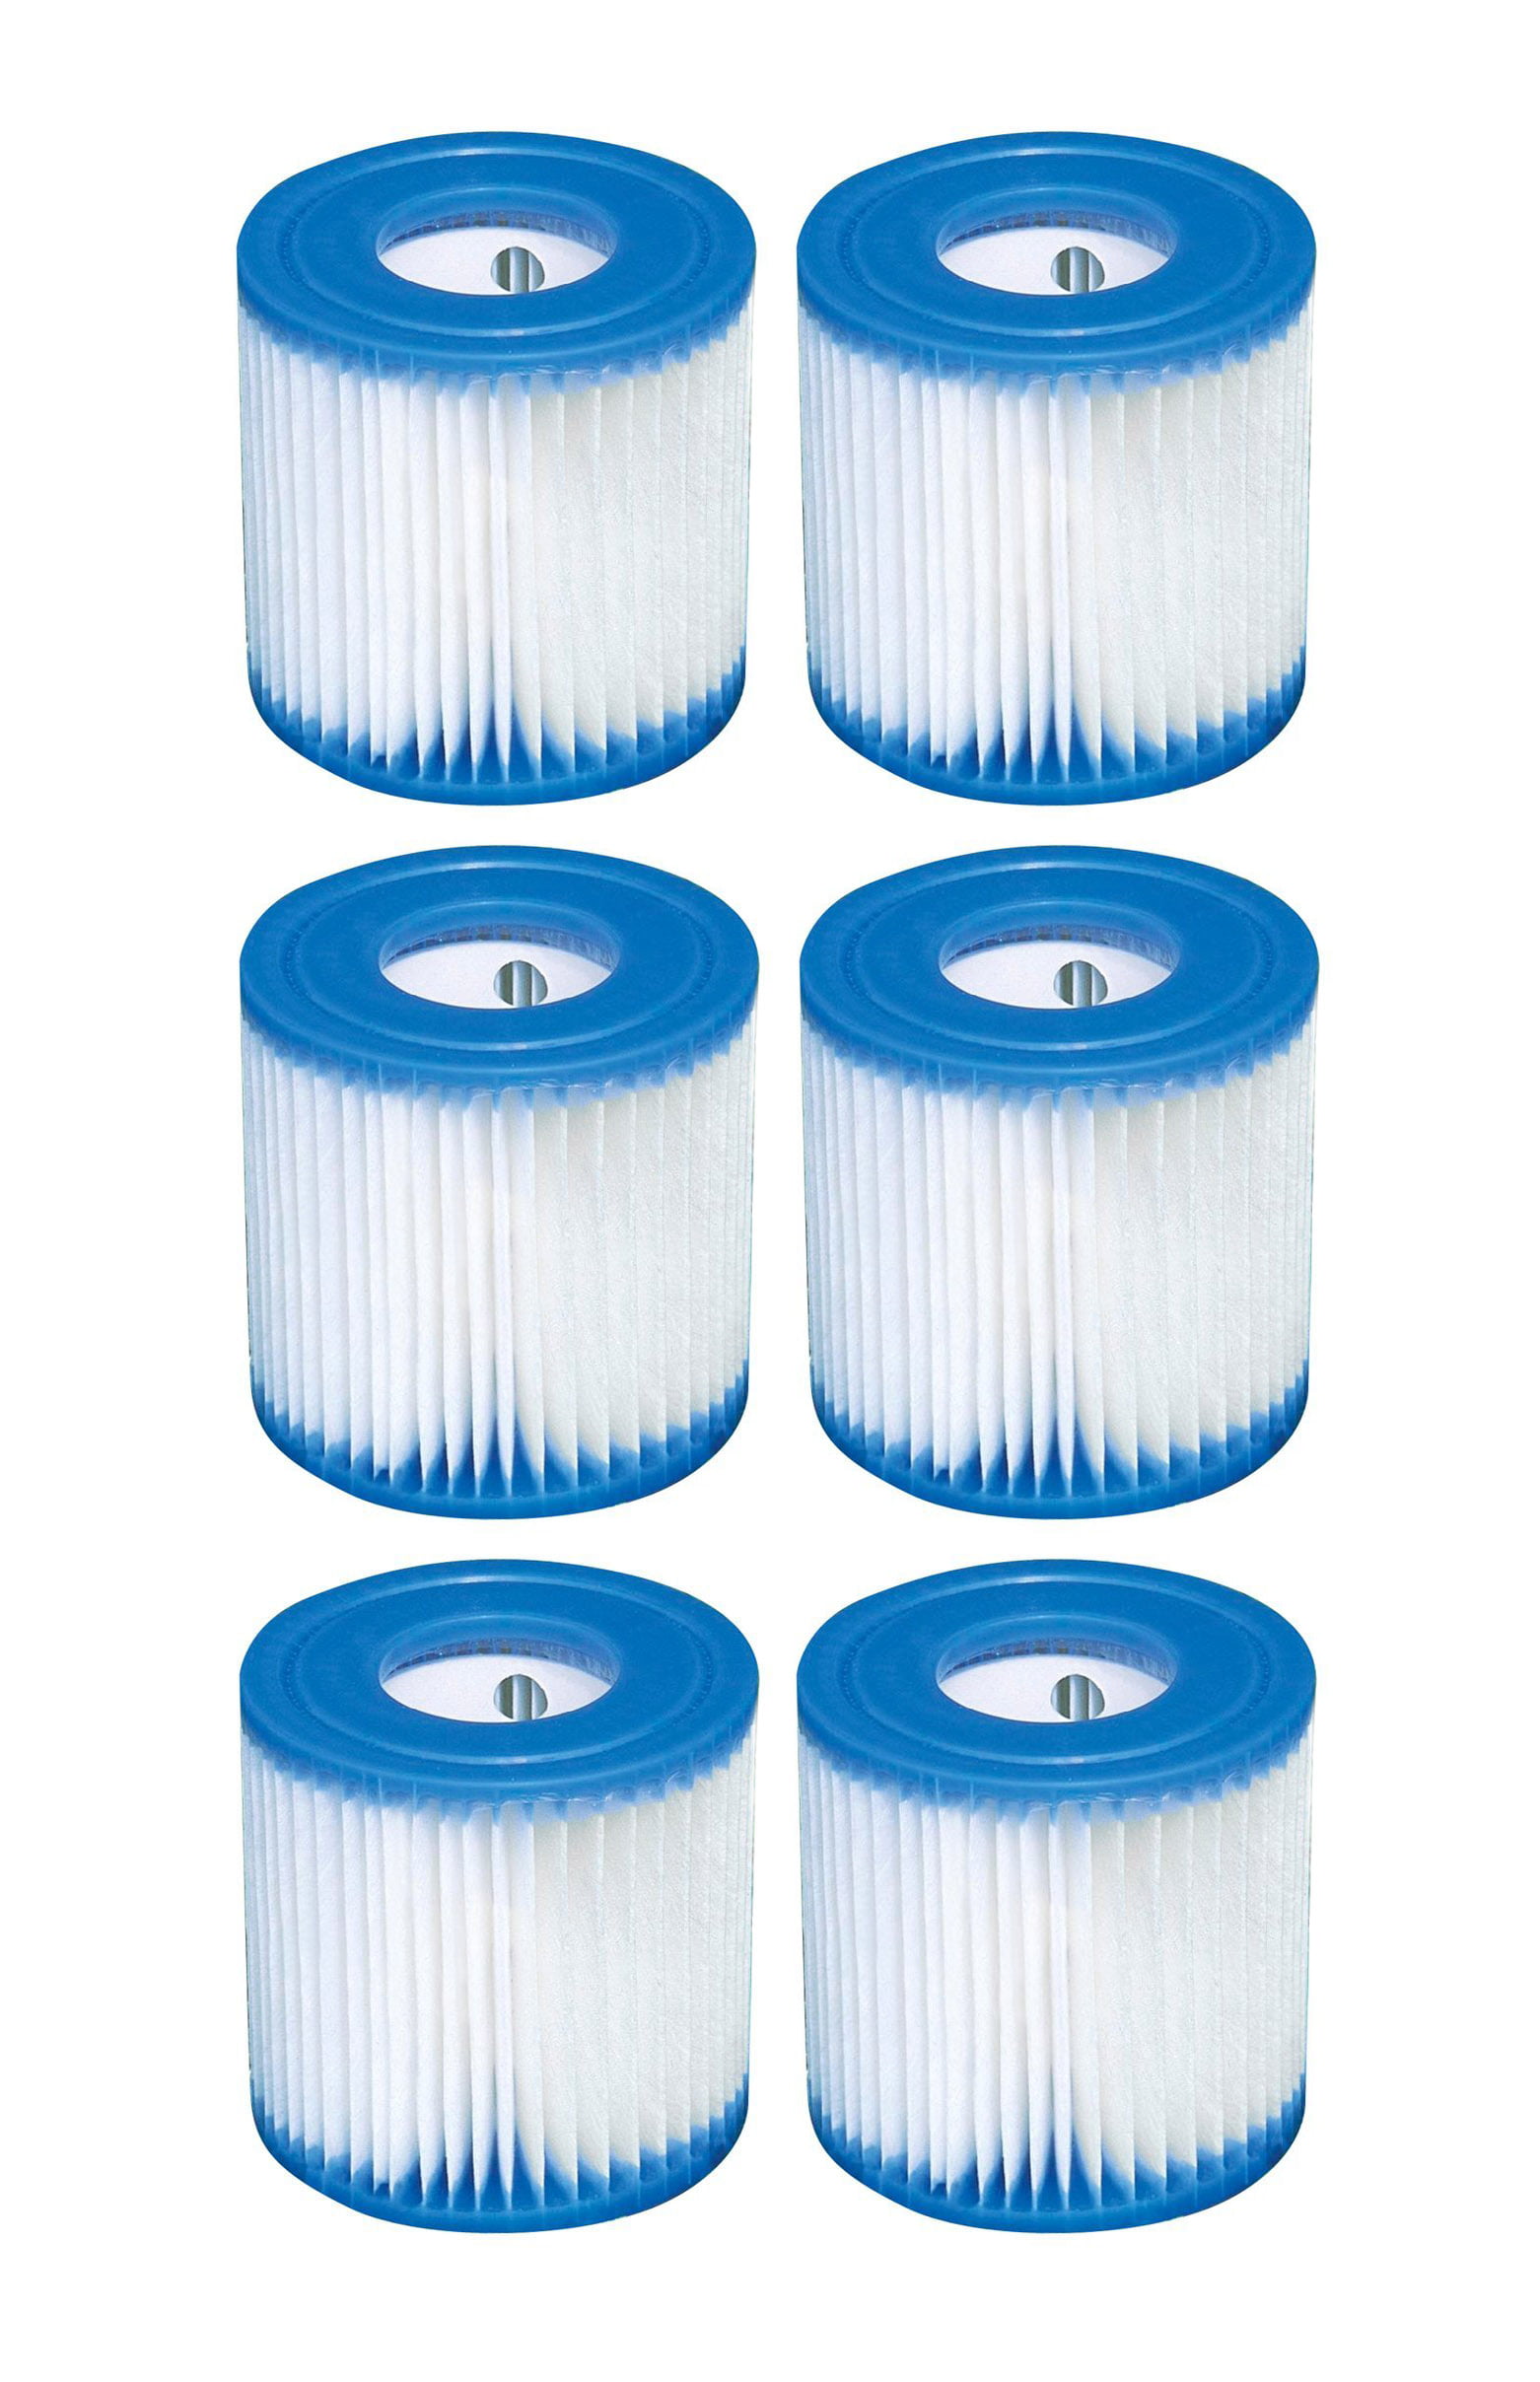 Intex Type H Easy Set Filter Cartridge Replacement for Swimming Pools 29007E